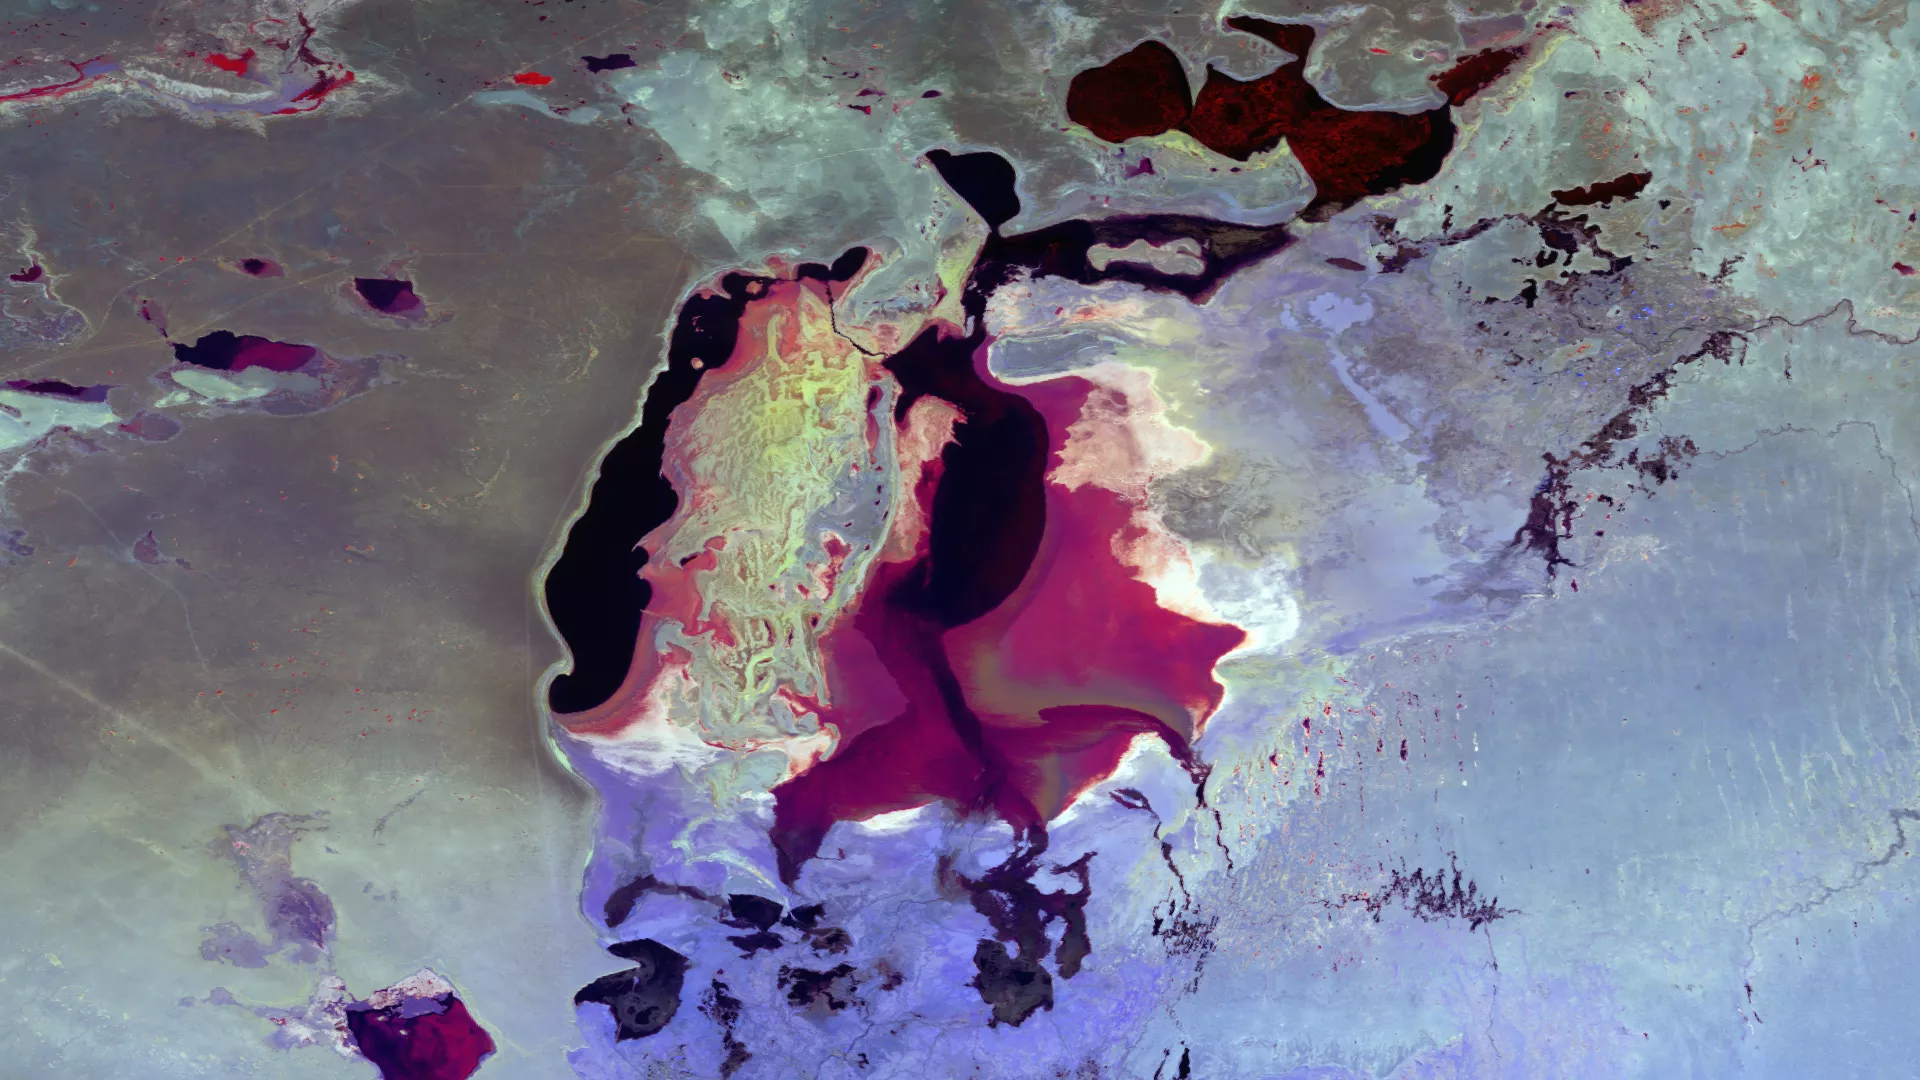 Image of the Aral Sea